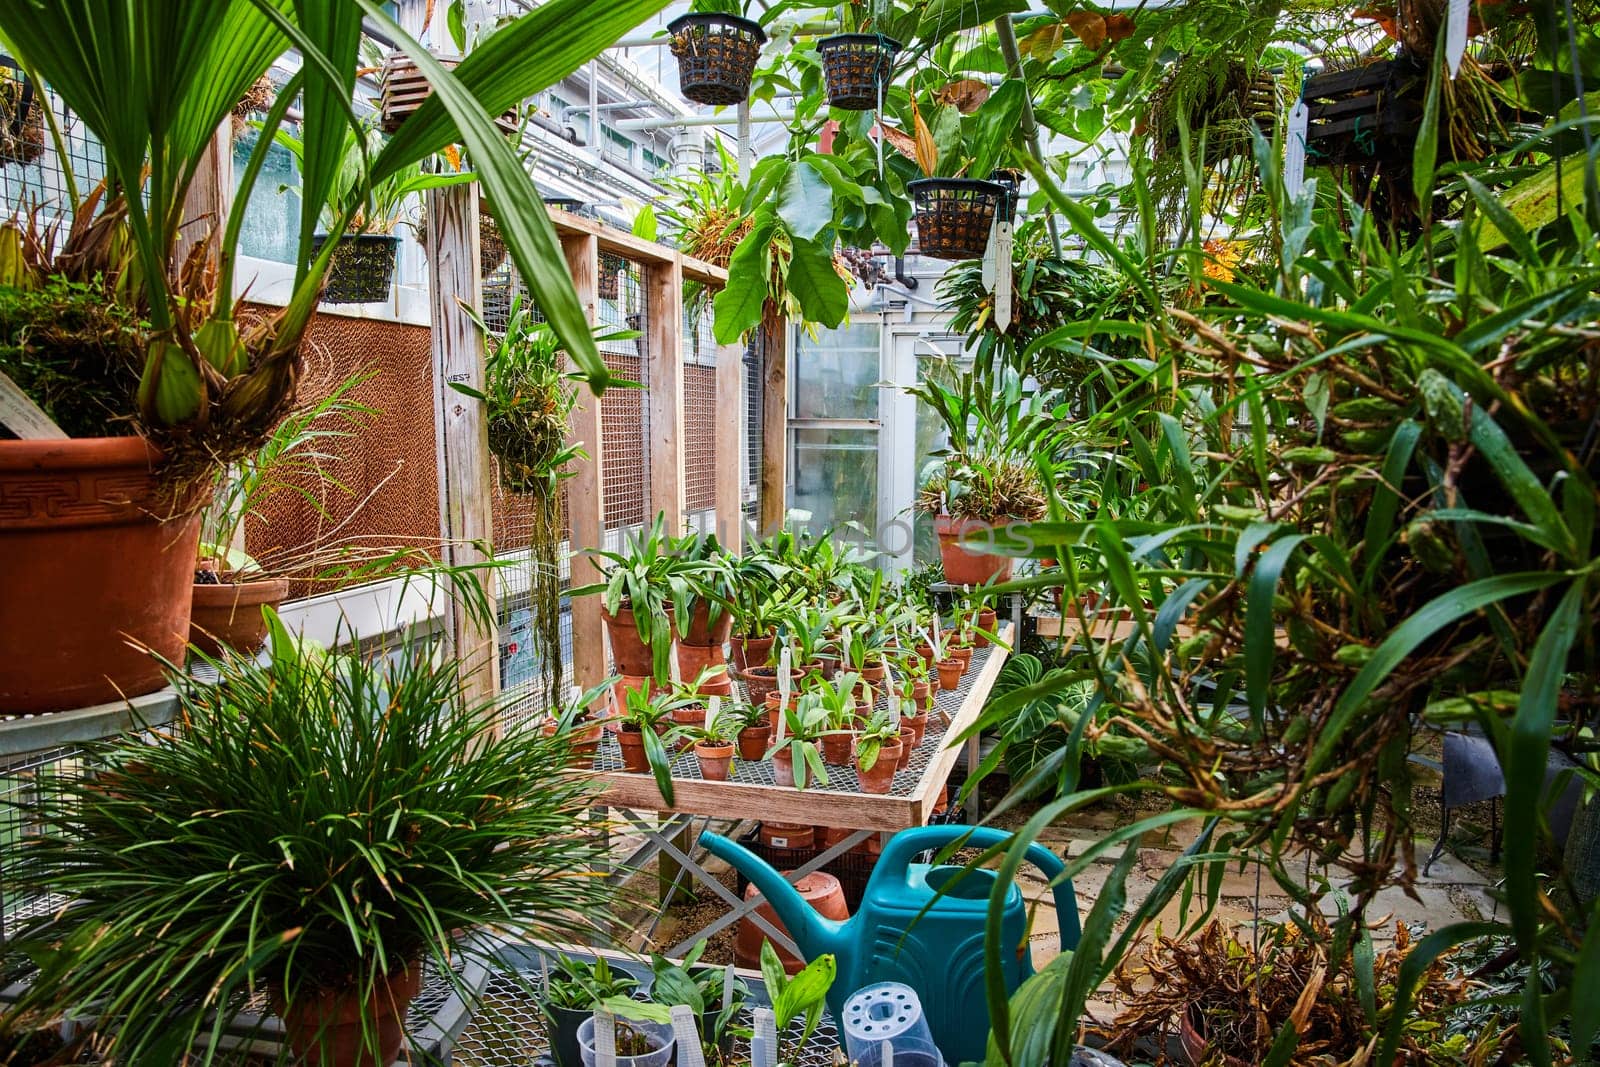 Lush Greenhouse in Muncie, Indiana, Bursting with Diverse Plants and Gardening Tools in Vibrant Daylight, Symbolizing Growth and Sustainability